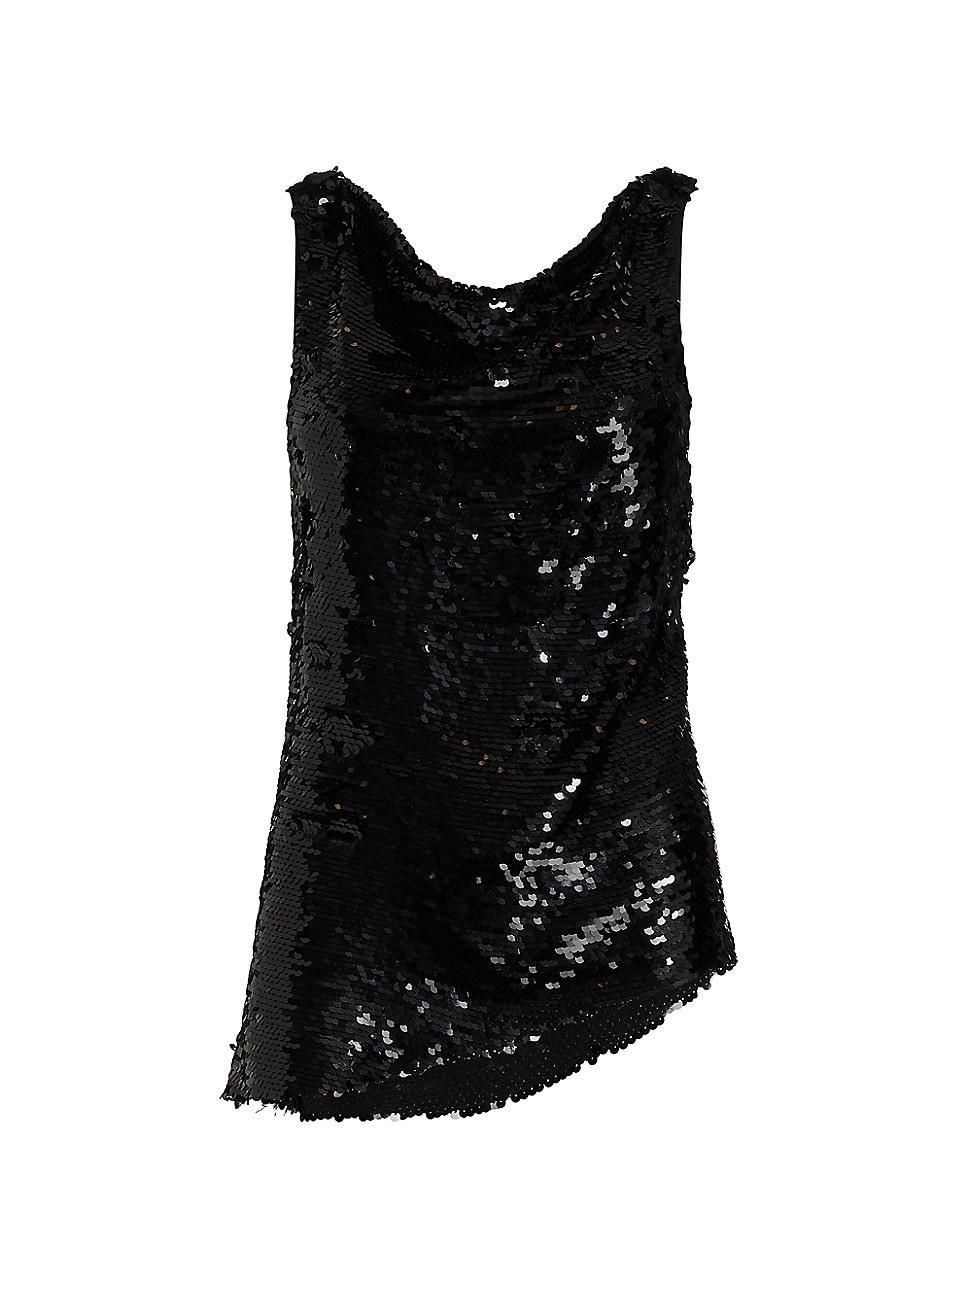 Womens Cowlneck Sequin Top Product Image